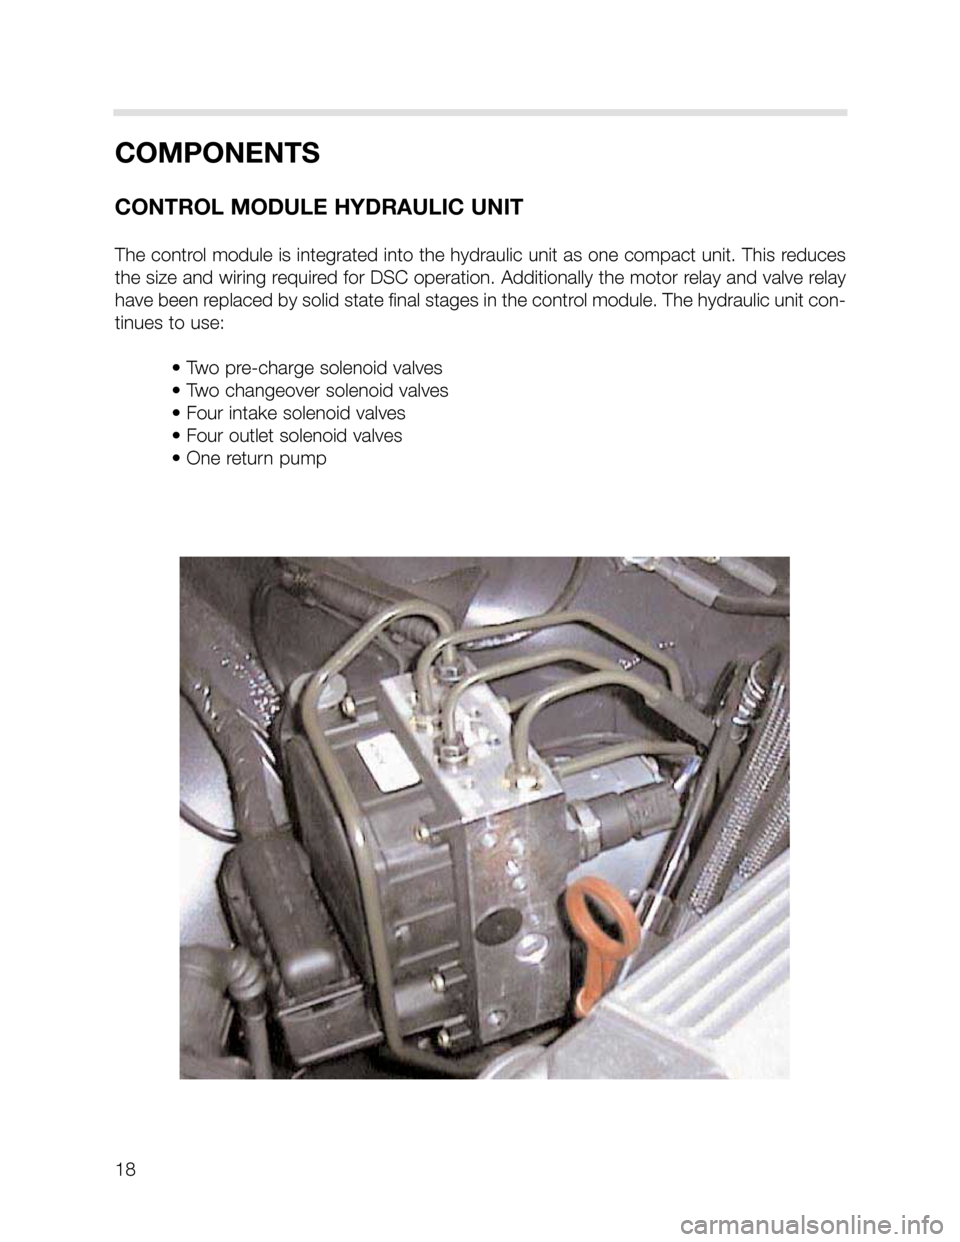 BMW X5 2002 E53 DSC System Workshop Manual 18
COMPONENTS
CONTROL MODULE HYDRAULIC UNIT
The control module is integrated into the hydraulic unit as one compact unit. This reduces
the size and wiring required for DSC operation. Additionally the 